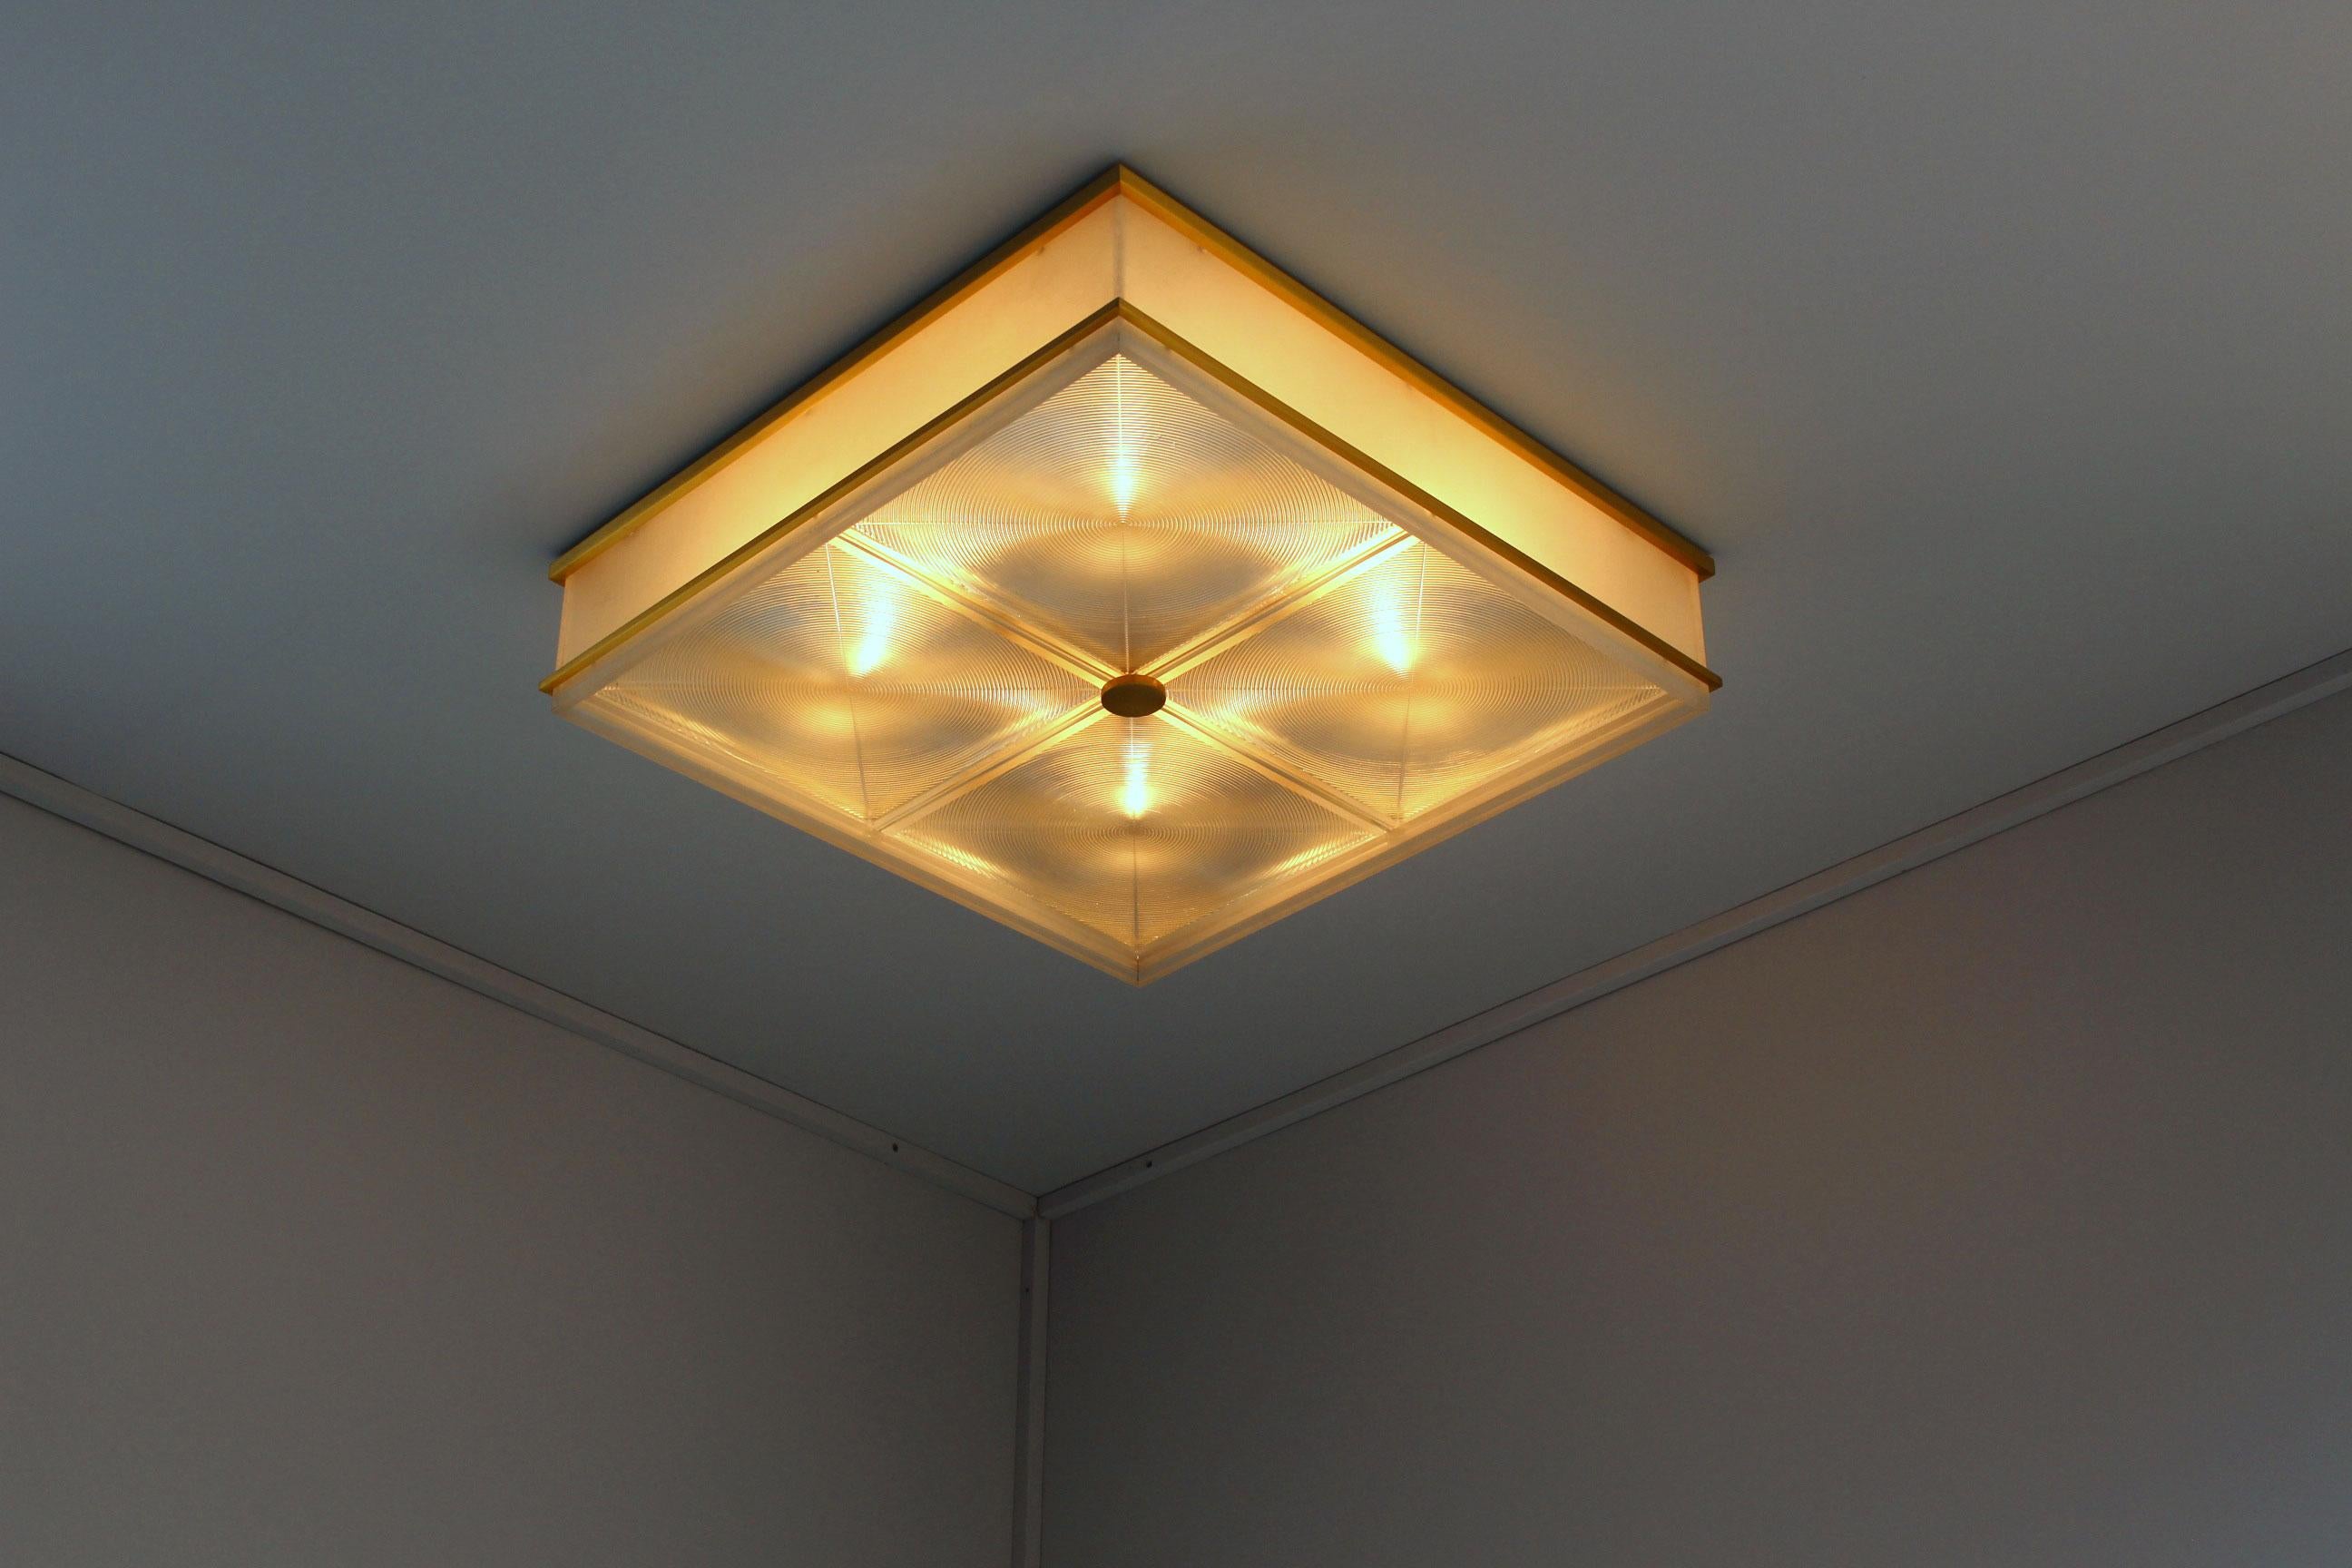 Jules Leleu: A fine French Mid-Century Ceiling light with a bronze frame, four lateral Lucite diffusers and four Holophane glass bottom diffusers.
Documentation: 